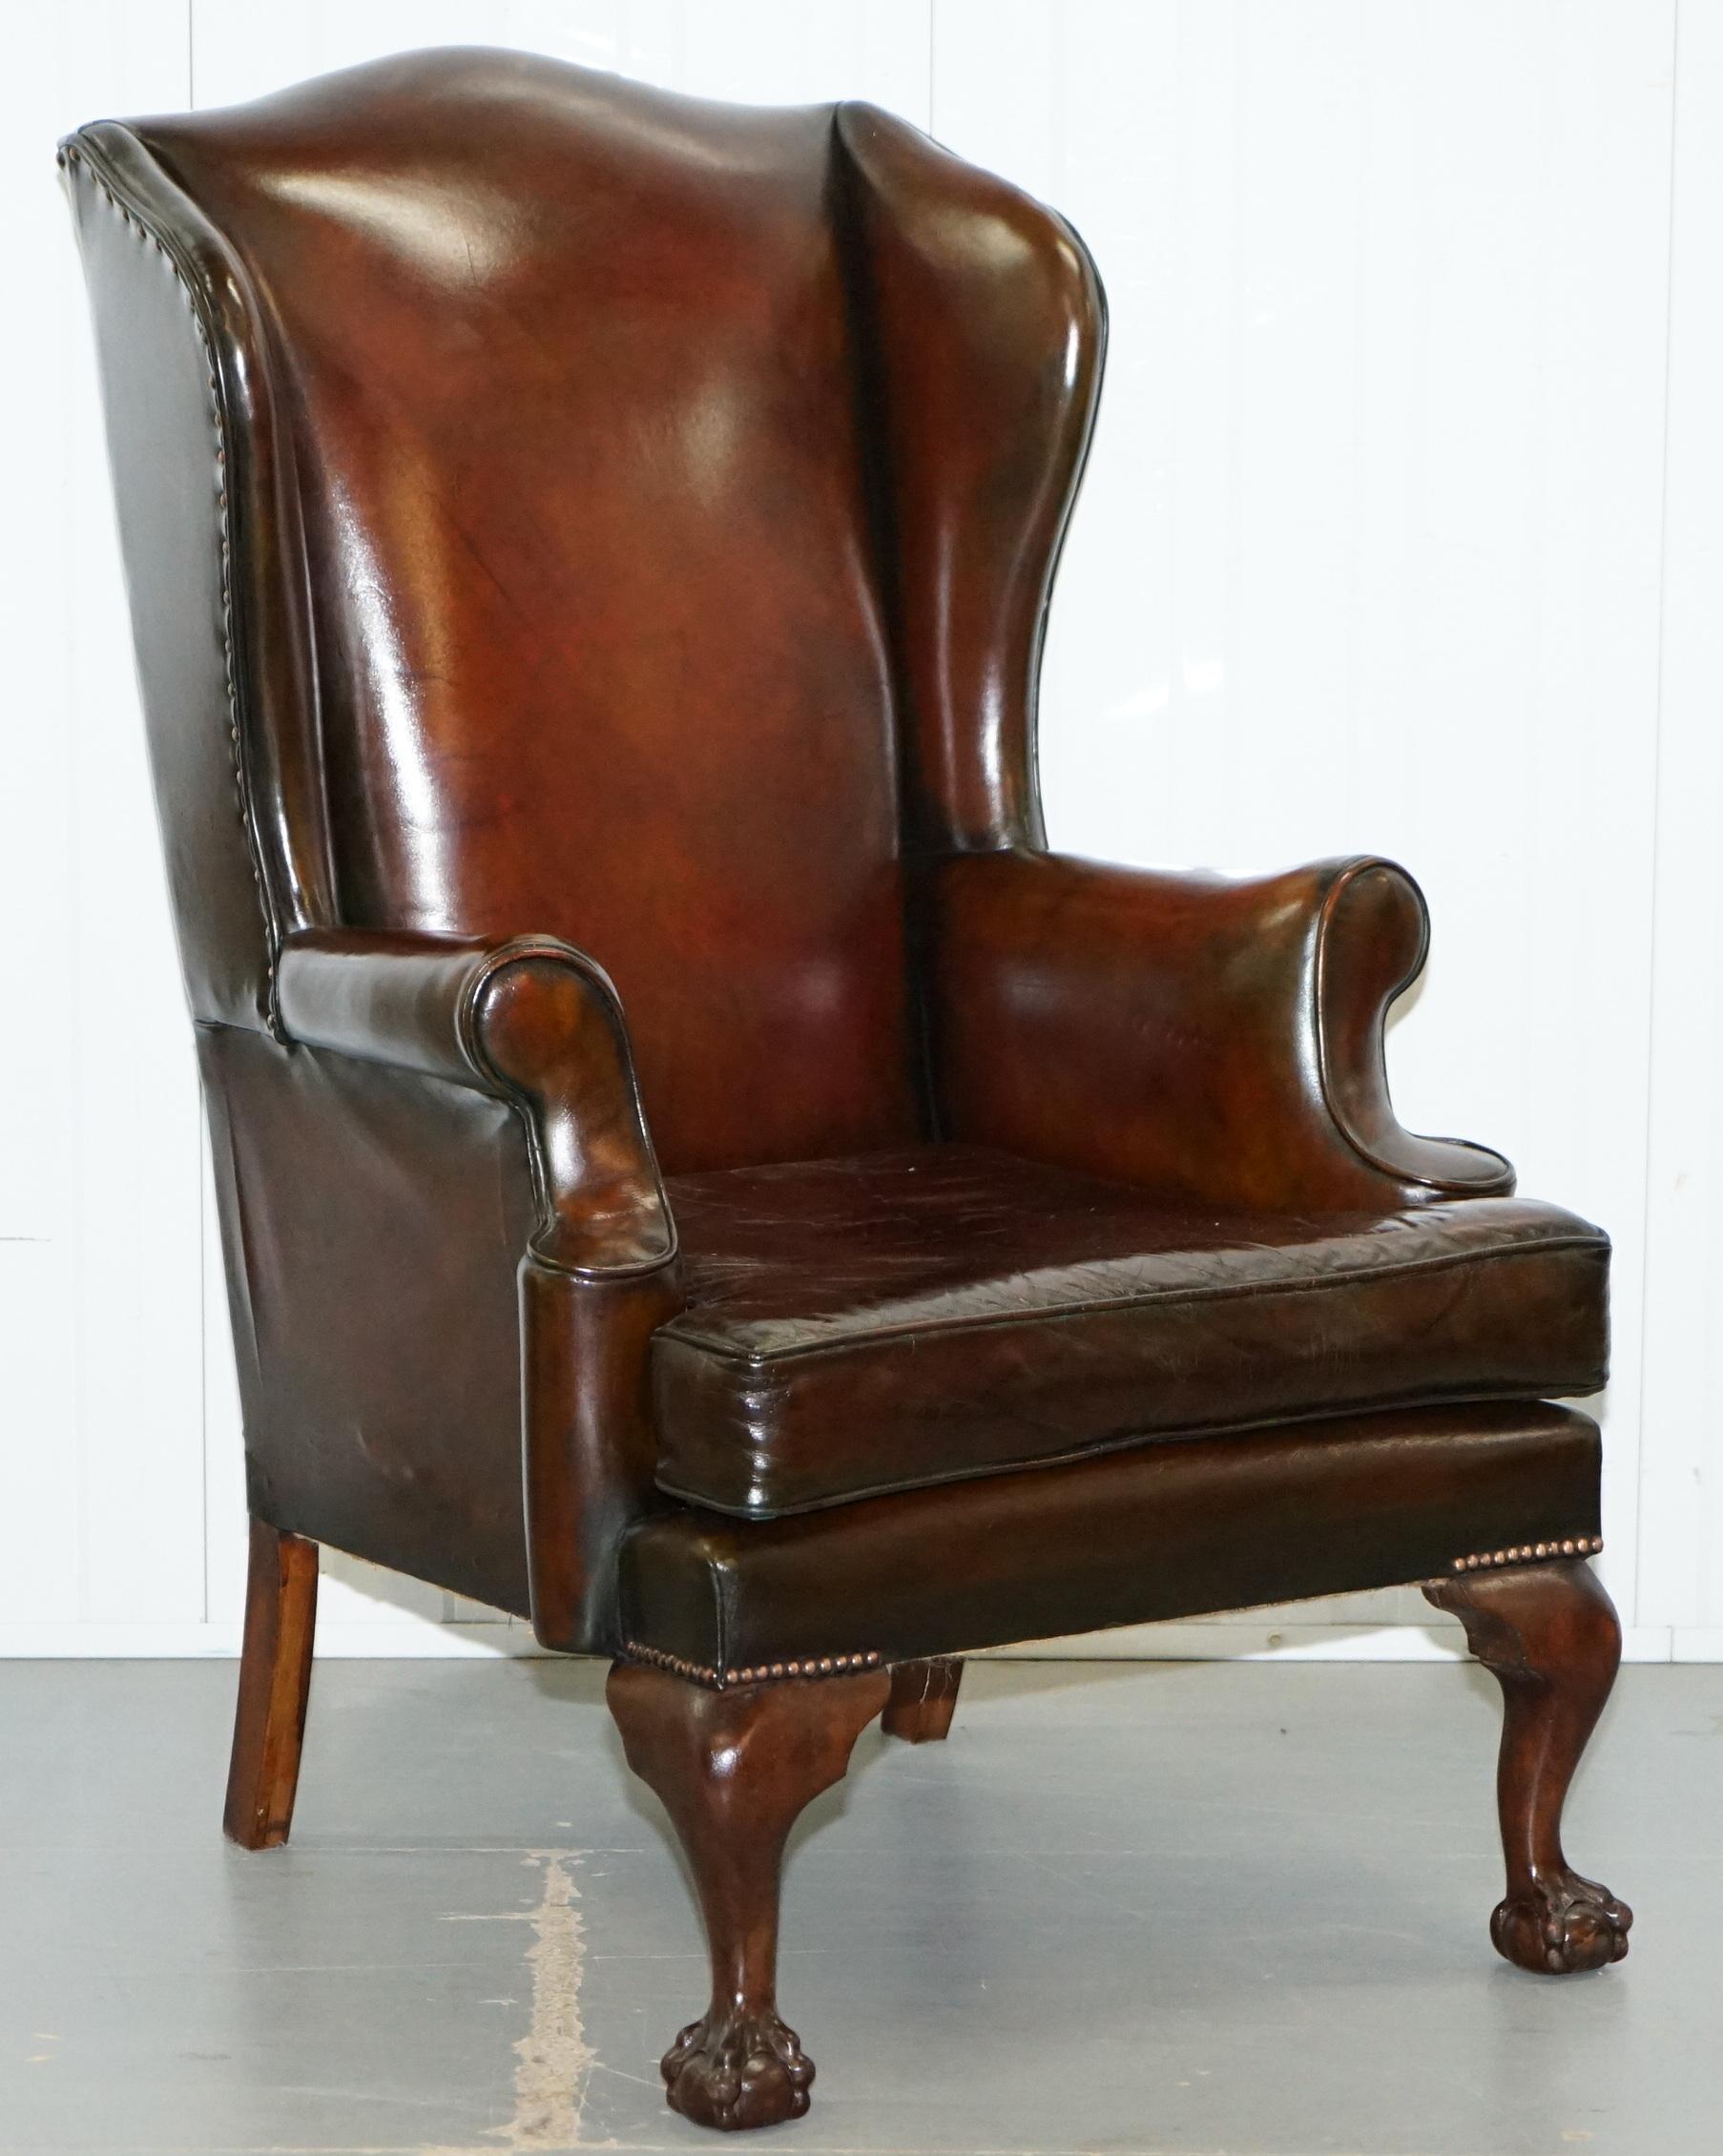 We are delighted to offer for sale this stunning pair of restored circa 1930 wingback armchairs with oversized hand carved claw and ball feet.

A good looking and well-made pair, nice to see with the hand carved claw and ball feet, they have a